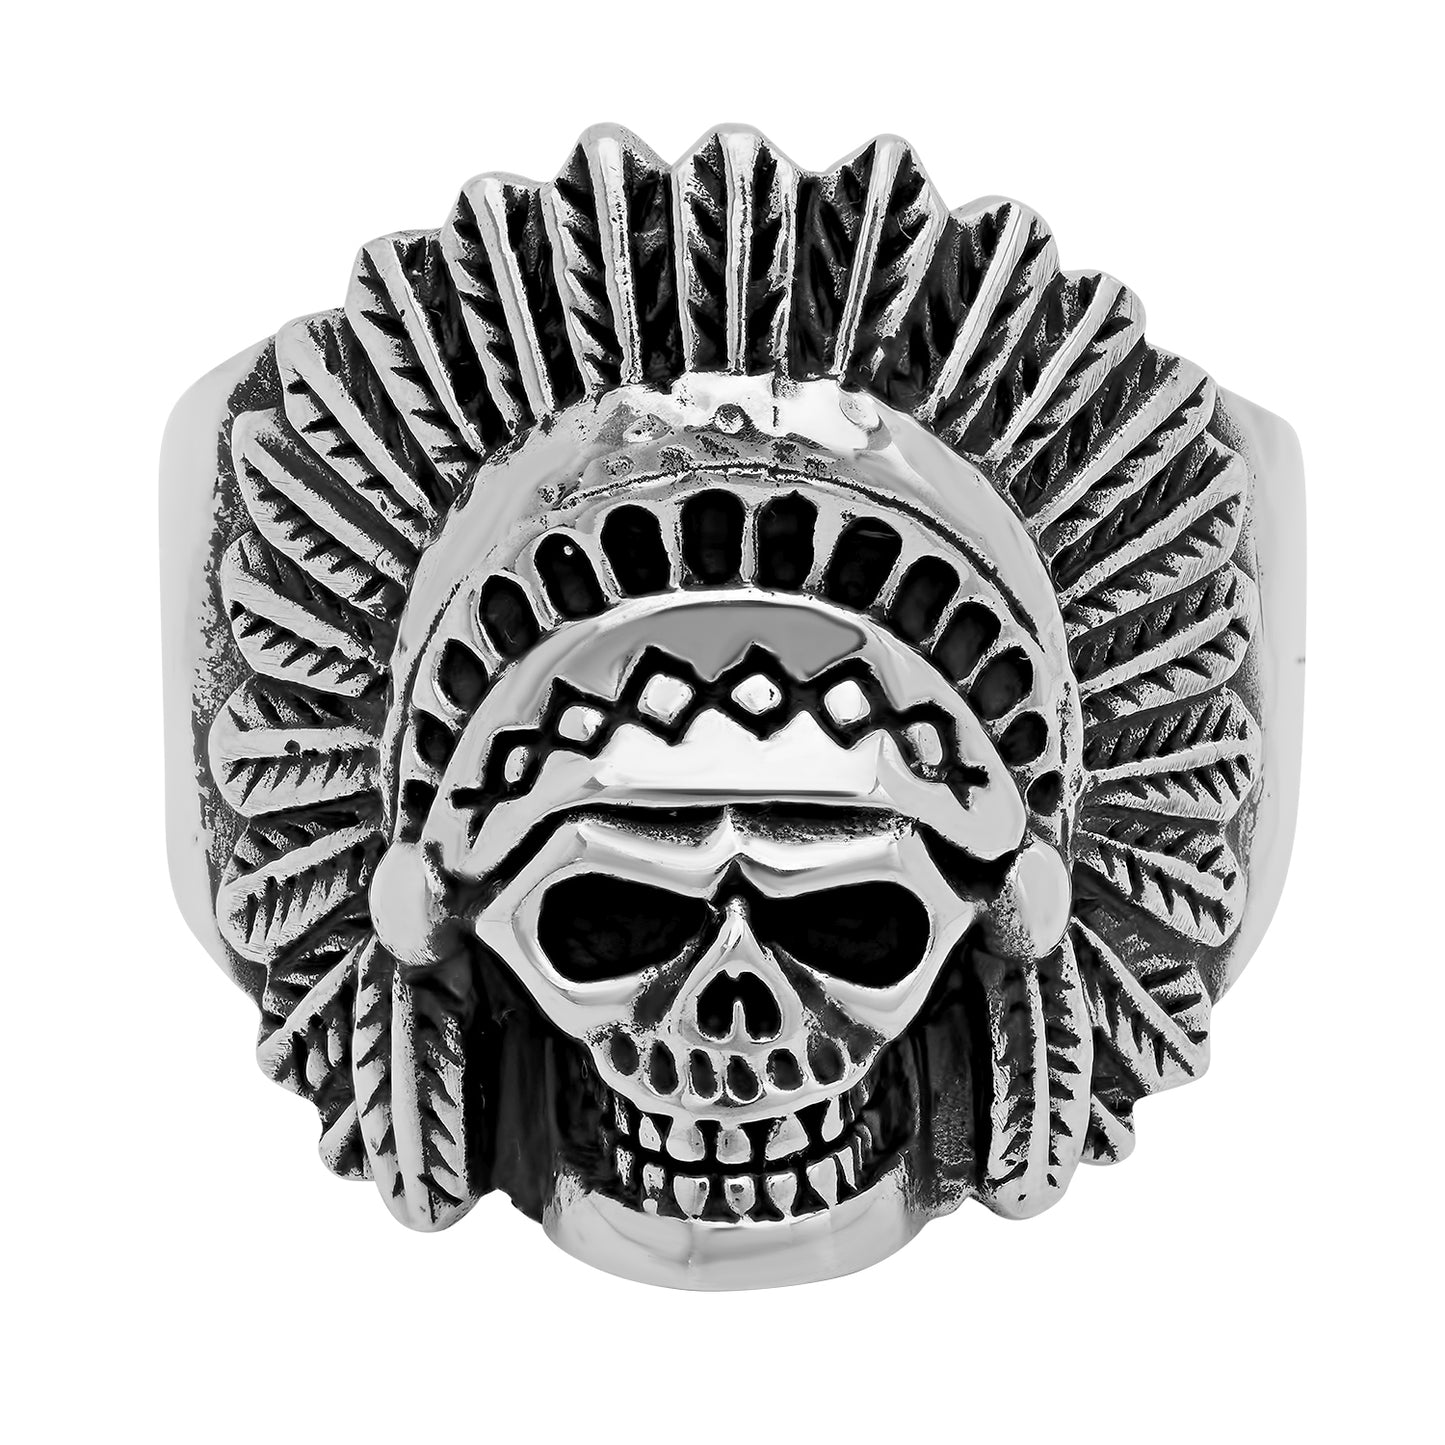 Oxidized 925 Sterling Silver Skull Chief In Headdress Ring + Jewelry Cloth & Pouch (SKU: SS-SKR110)